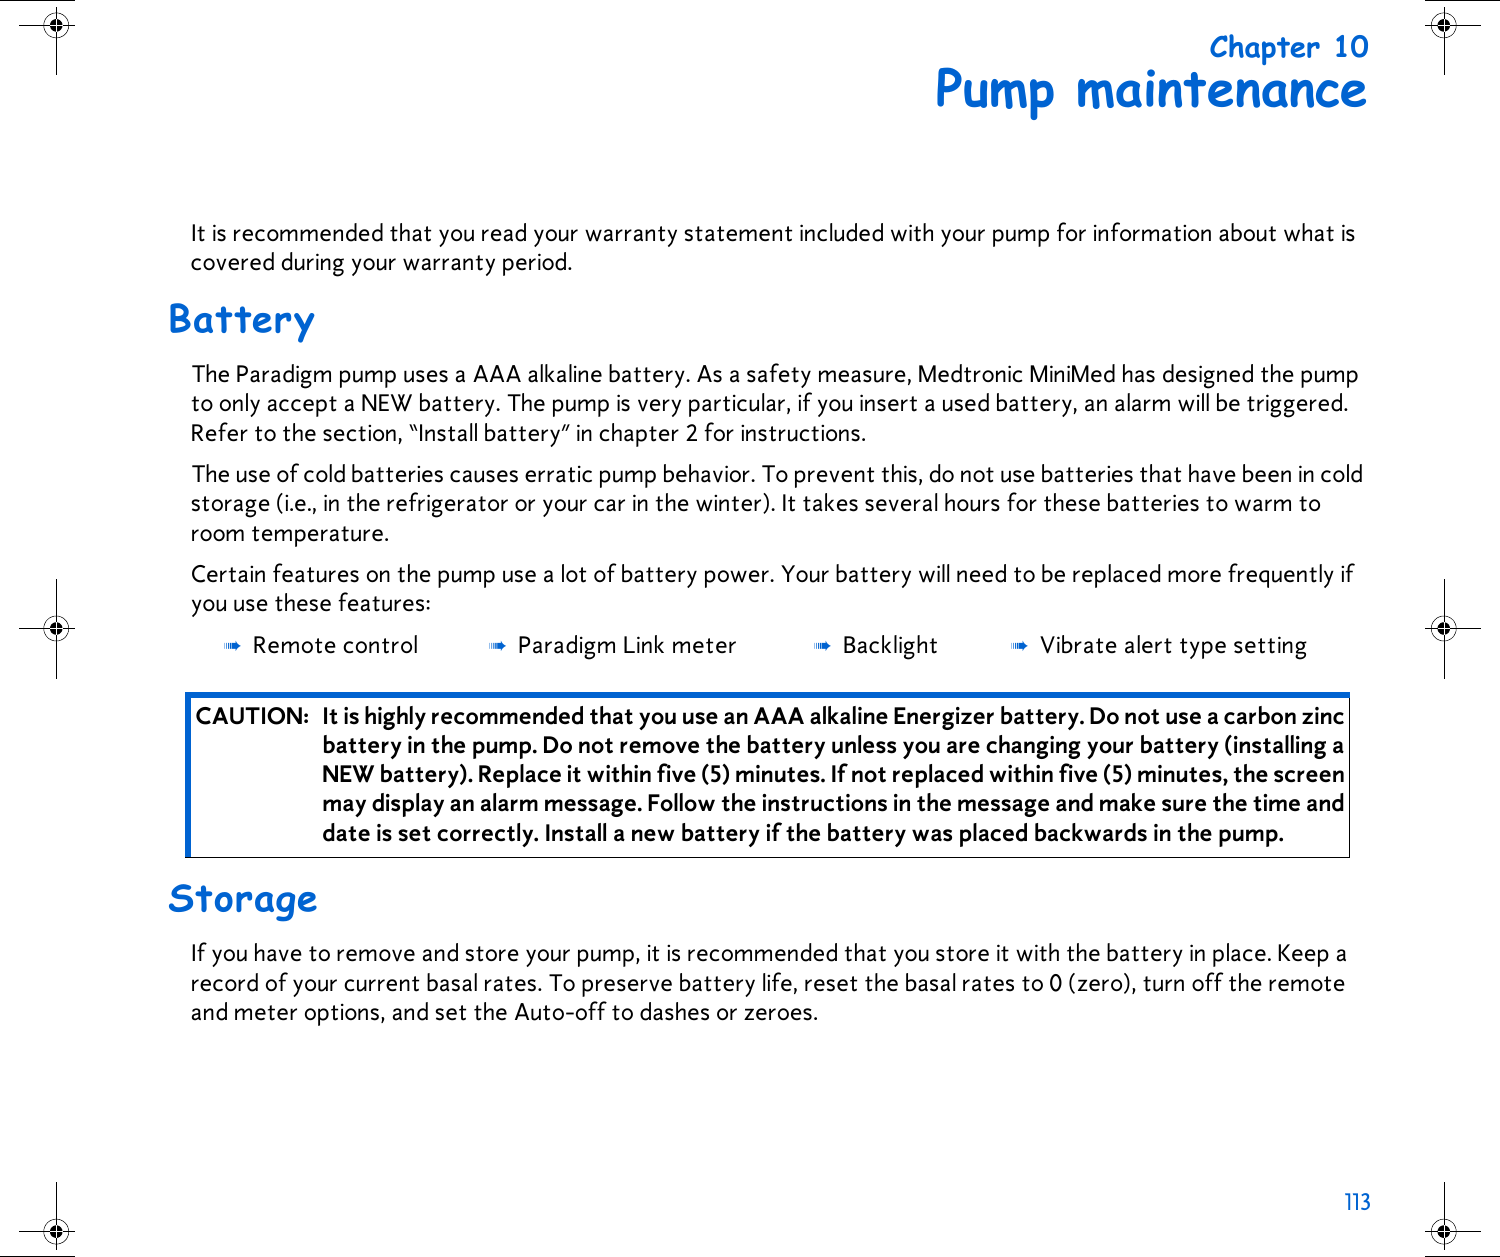 113 Chapter 10Pump maintenanceIt is recommended that you read your warranty statement included with your pump for information about what is covered during your warranty period.BatteryThe Paradigm pump uses a AAA alkaline battery. As a safety measure, Medtronic MiniMed has designed the pump to only accept a NEW battery. The pump is very particular, if you insert a used battery, an alarm will be triggered. Refer to the section, “Install battery” in chapter 2 for instructions. The use of cold batteries causes erratic pump behavior. To prevent this, do not use batteries that have been in cold storage (i.e., in the refrigerator or your car in the winter). It takes several hours for these batteries to warm to room temperature.Certain features on the pump use a lot of battery power. Your battery will need to be replaced more frequently if you use these features: StorageIf you have to remove and store your pump, it is recommended that you store it with the battery in place. Keep a record of your current basal rates. To preserve battery life, reset the basal rates to 0 (zero), turn off the remote and meter options, and set the Auto-off to dashes or zeroes.➠Remote control ➠Paradigm Link meter ➠Backlight ➠Vibrate alert type settingCAUTION: It is highly recommended that you use an AAA alkaline Energizer battery. Do not use a carbon zinc battery in the pump. Do not remove the battery unless you are changing your battery (installing a NEW battery). Replace it within five (5) minutes. If not replaced within five (5) minutes, the screen may display an alarm message. Follow the instructions in the message and make sure the time and date is set correctly. Install a new battery if the battery was placed backwards in the pump.